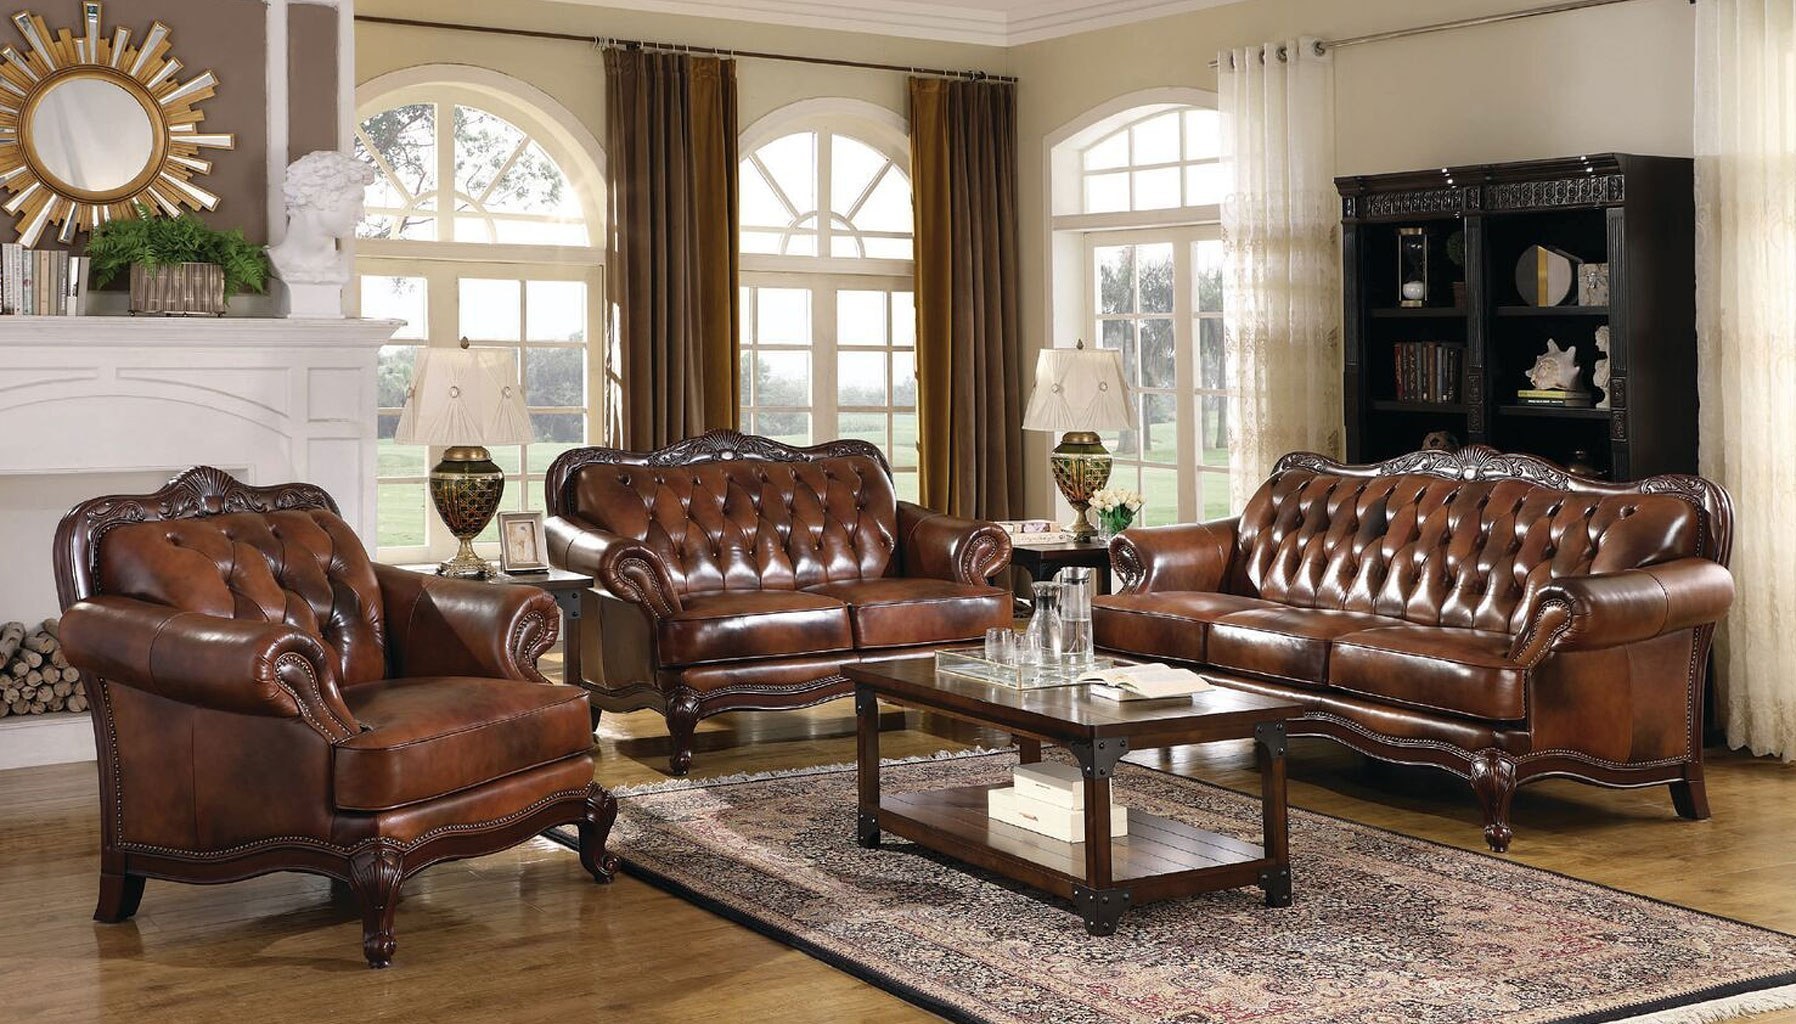 leather suitcases in living room decor